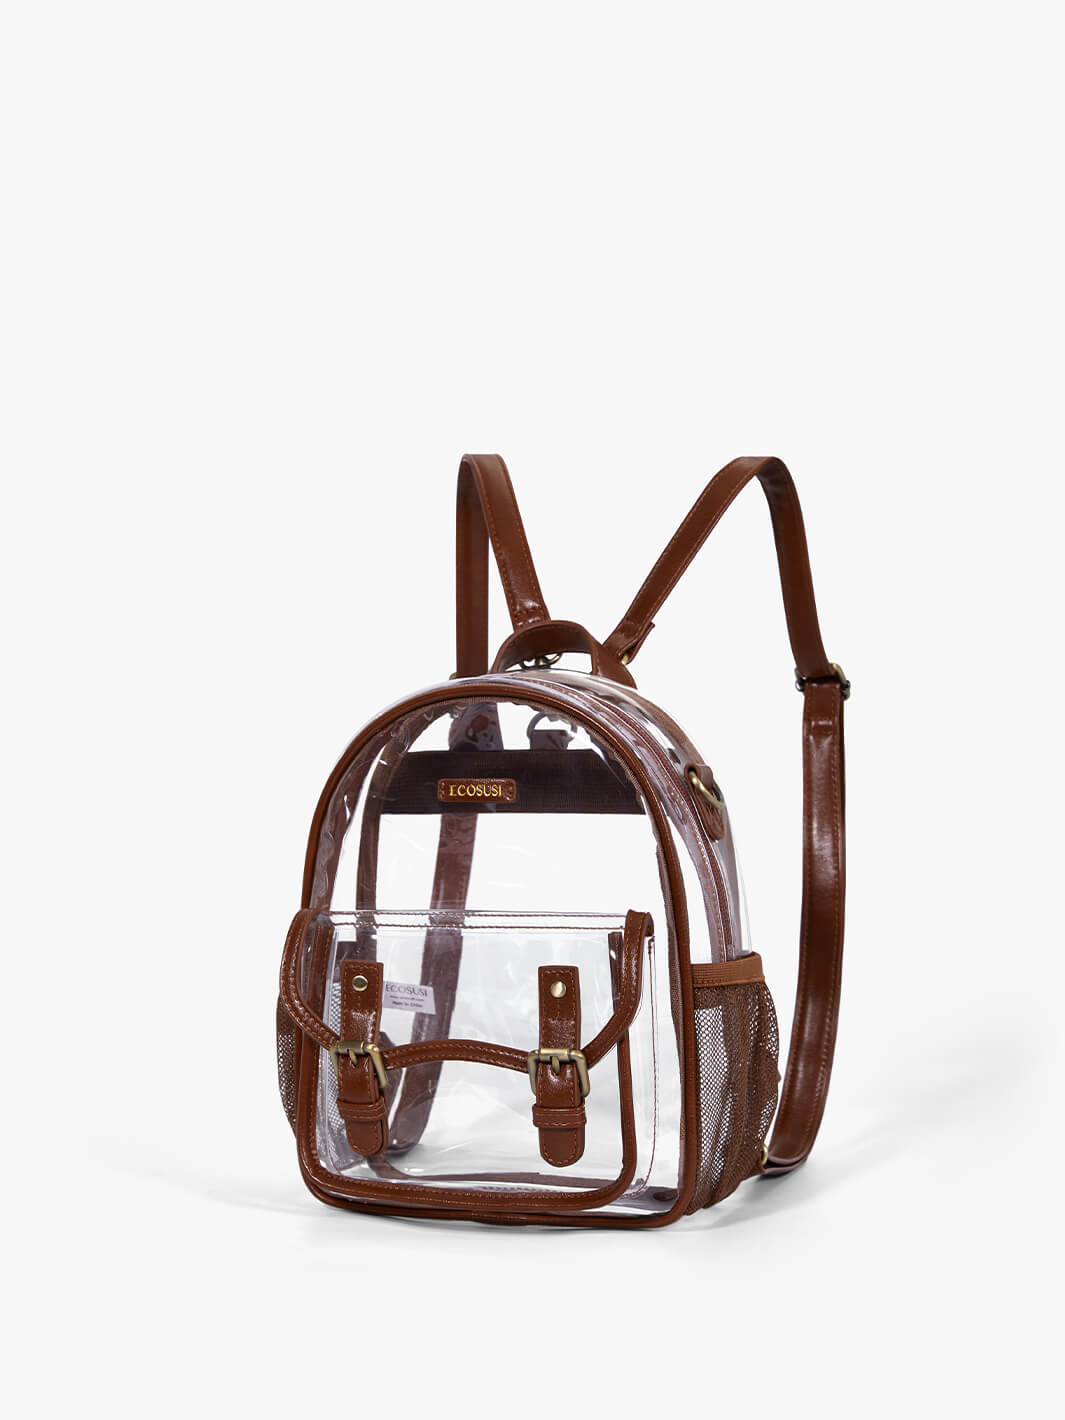 Mini Backpack Clear with Gold-colored Hardware - ECOSUSI Brown Backpack